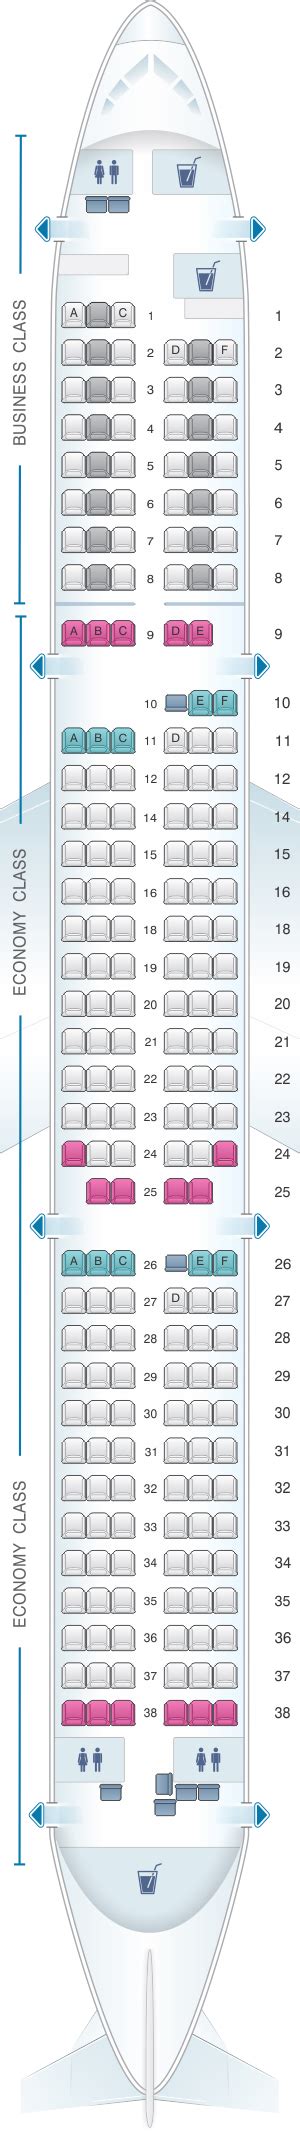 Airbus 321 seat map. The knee crunchers in row 17 and up are impossible seats for overnight sleeping. In row 13, at least, both the center and window seats have utility boxes that reduce legroom so stick to the aisle if you want a full, under-seat space for your legs. Submitted by SeatGuru User on 2017/09/18 for Seat 12C. 